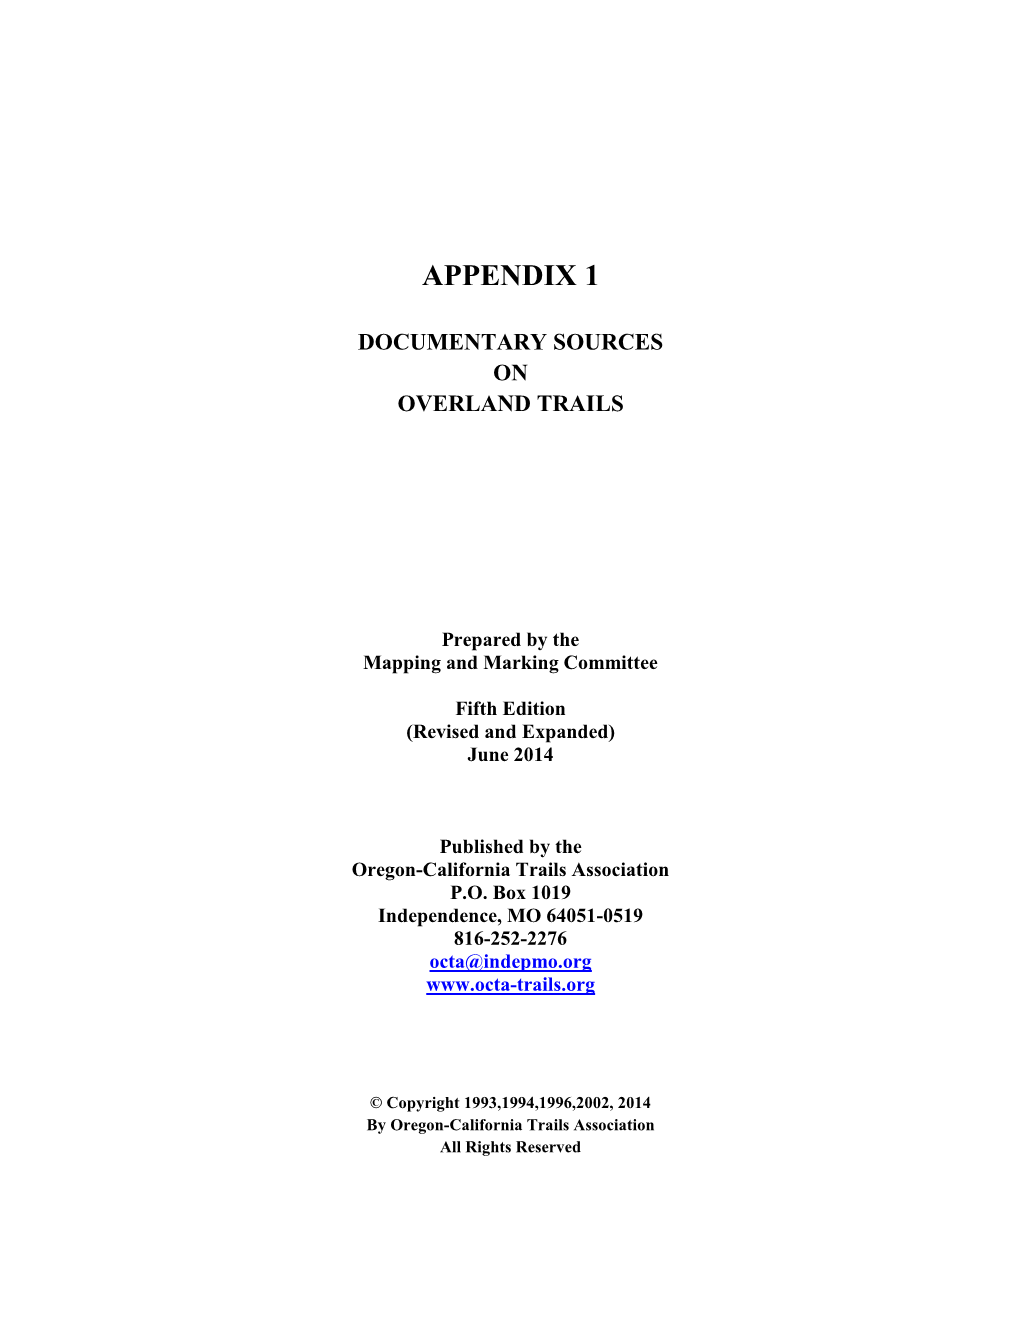 Appendix 1 Documentary Sources for Overland Trails